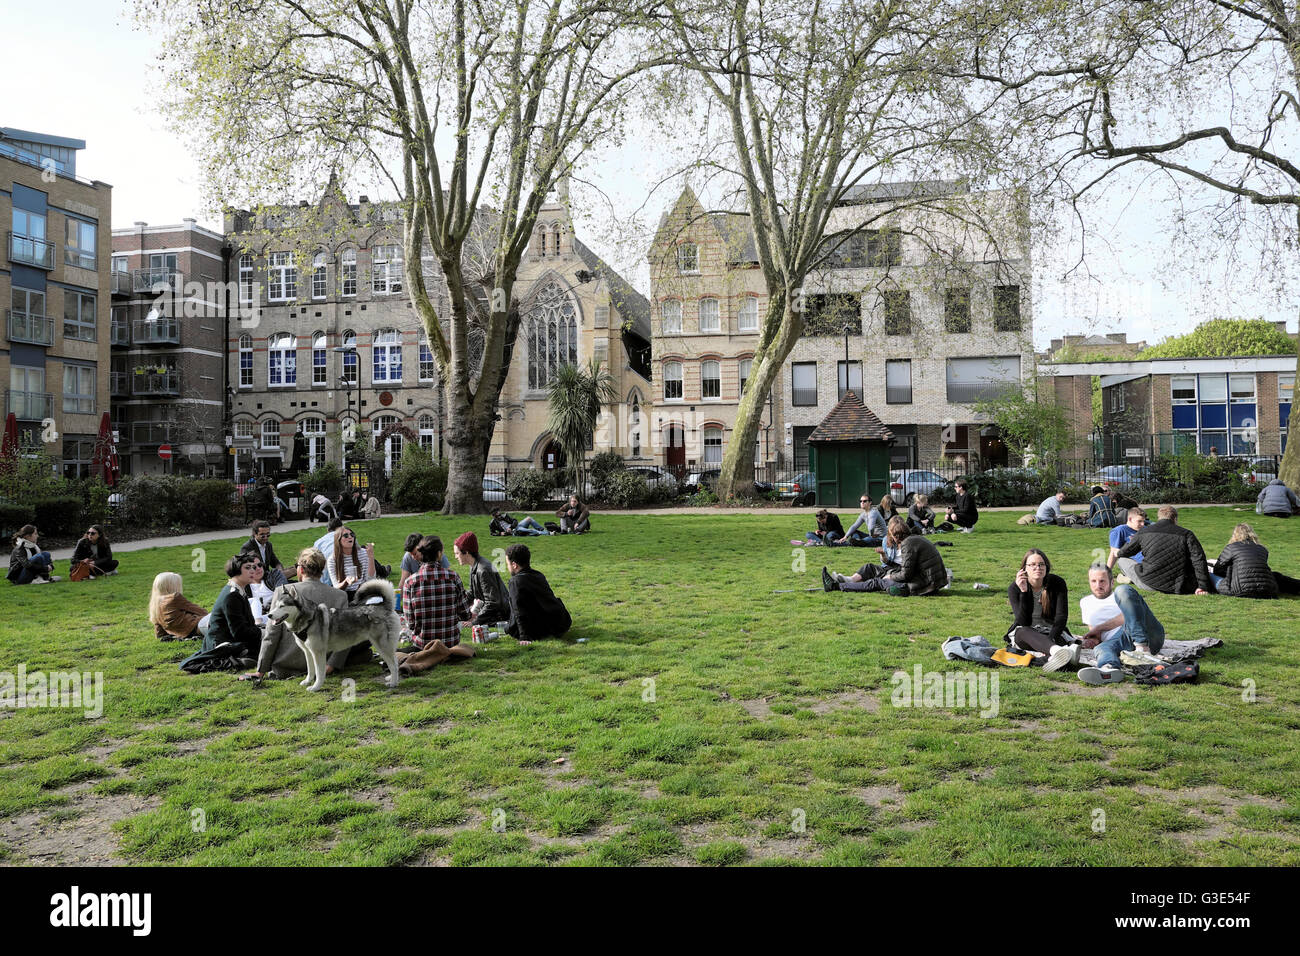 People relaxing in Hoxton Square in early spring 2016  East London, England UK  KATHY DEWITT Stock Photo